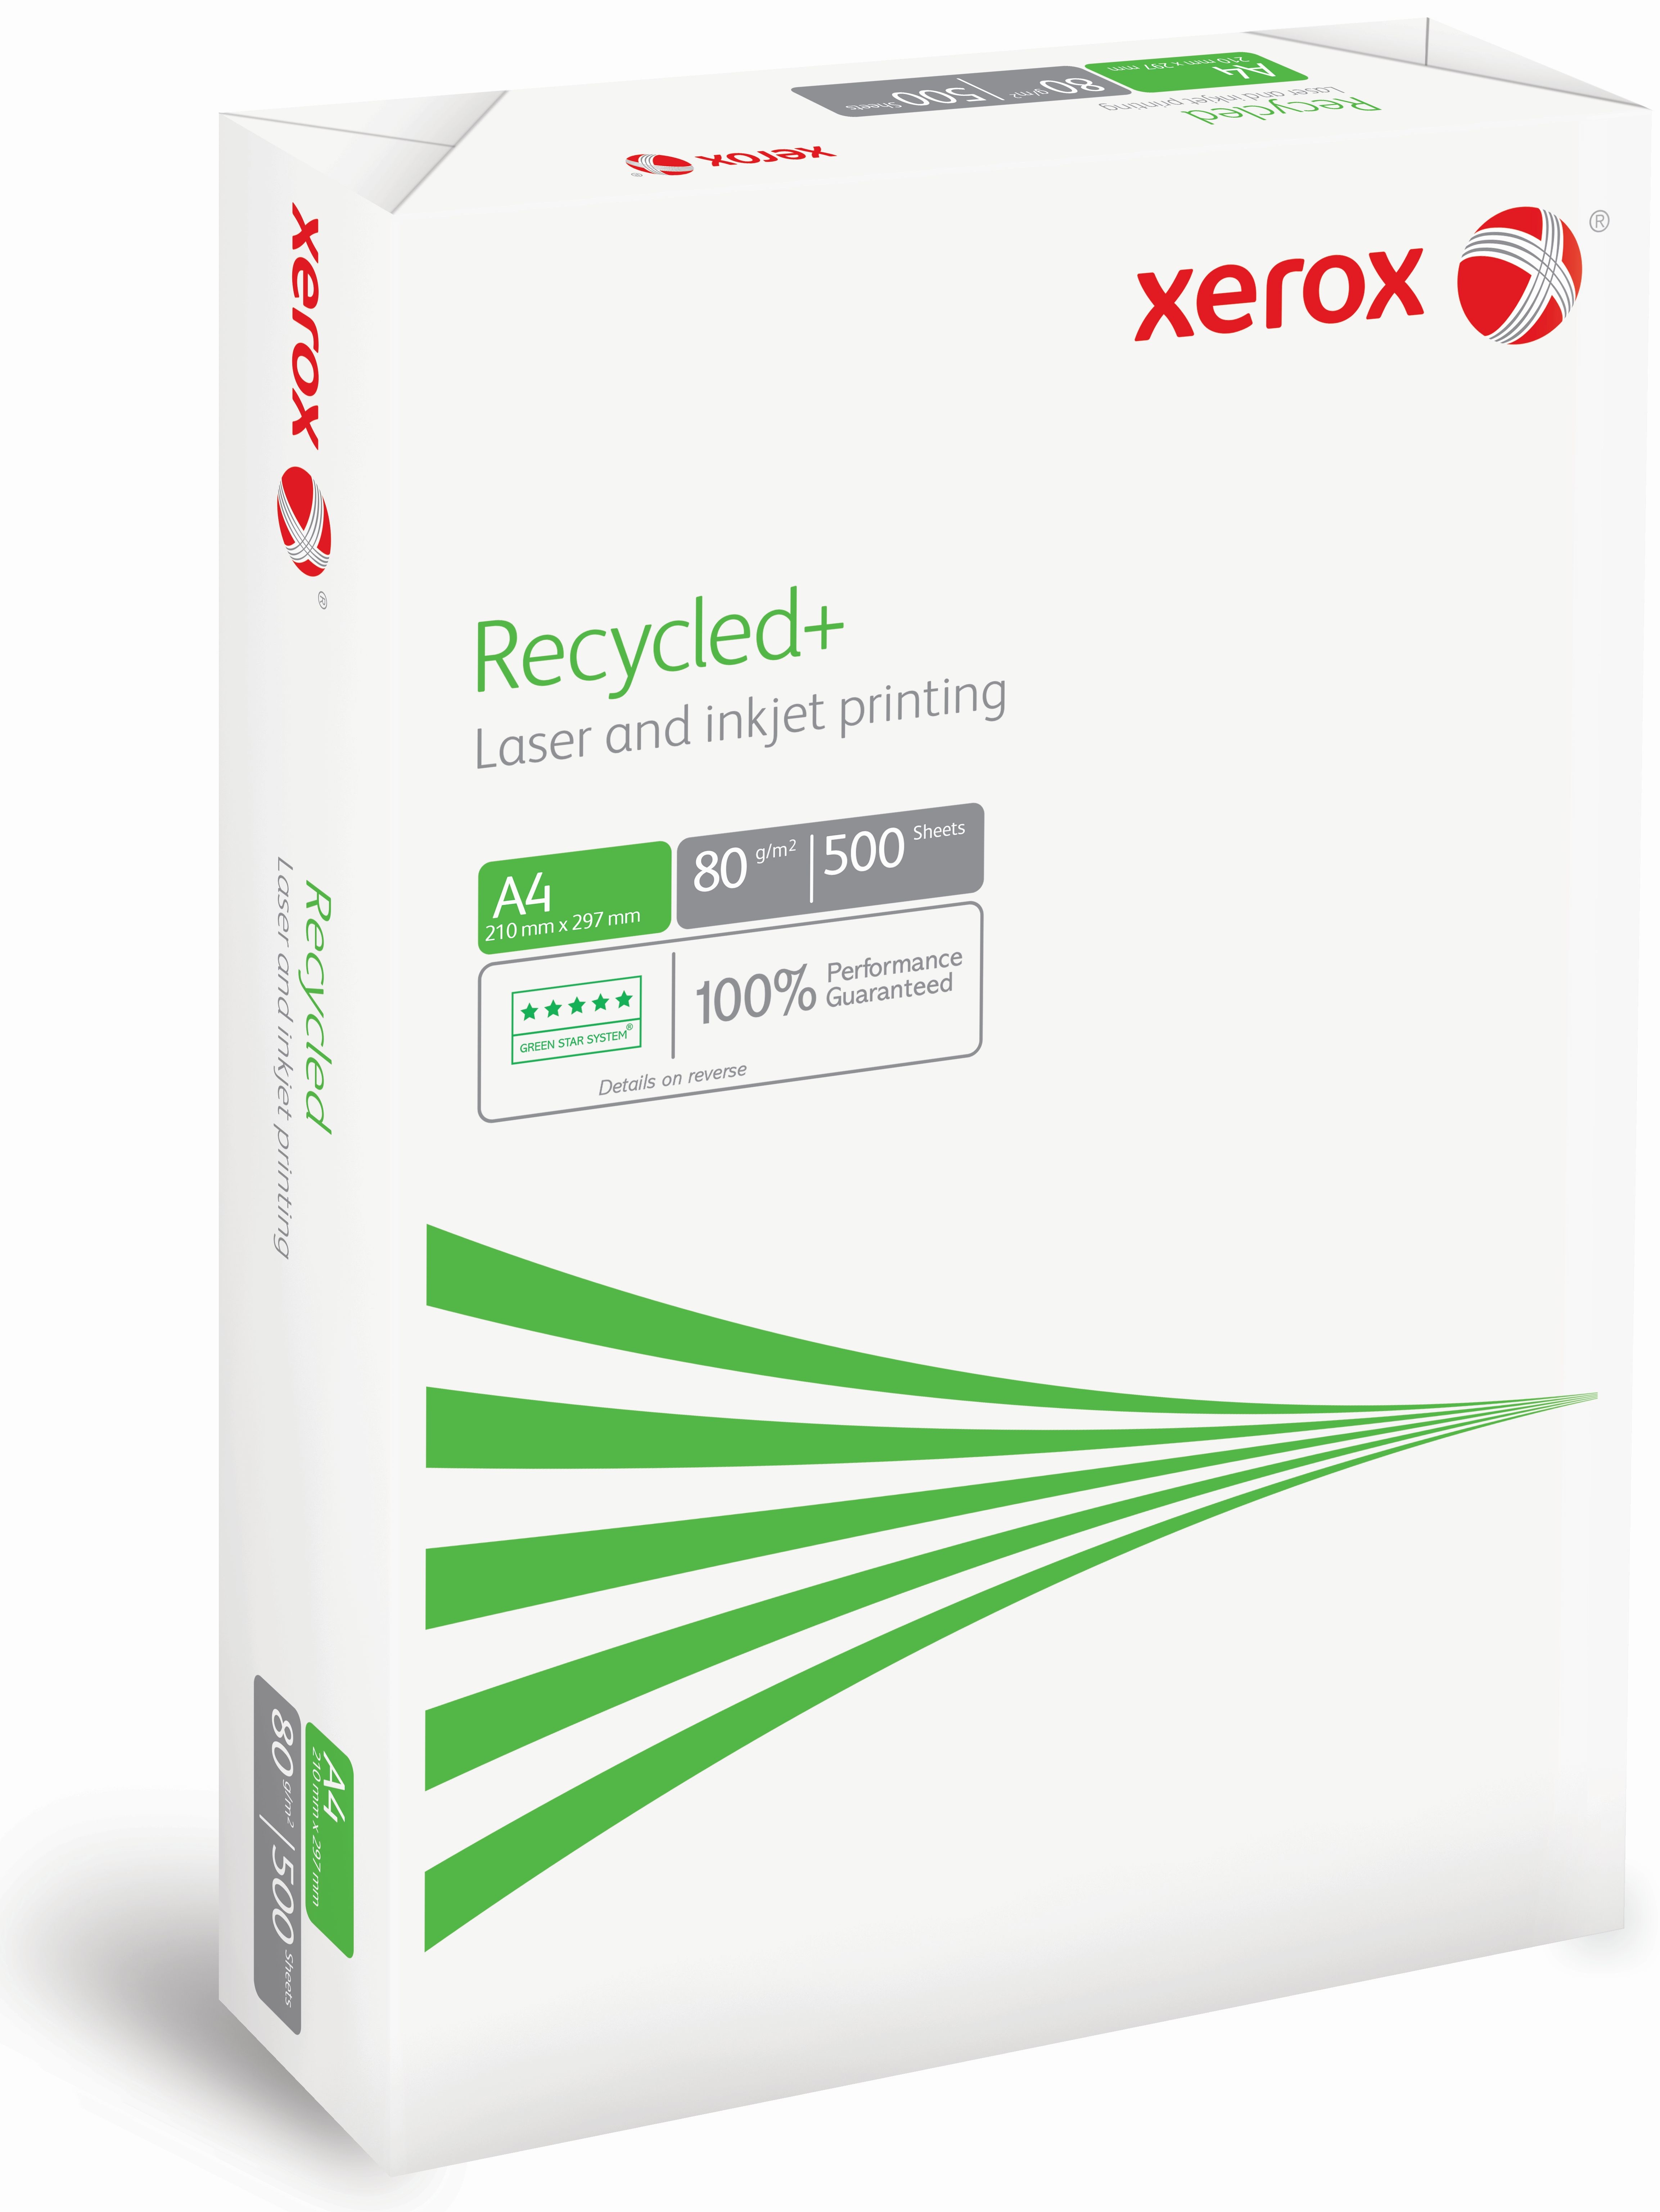 XEROX Copying Paper Recycled+ A4 470224 80g blanc CIE85 500 feuilles